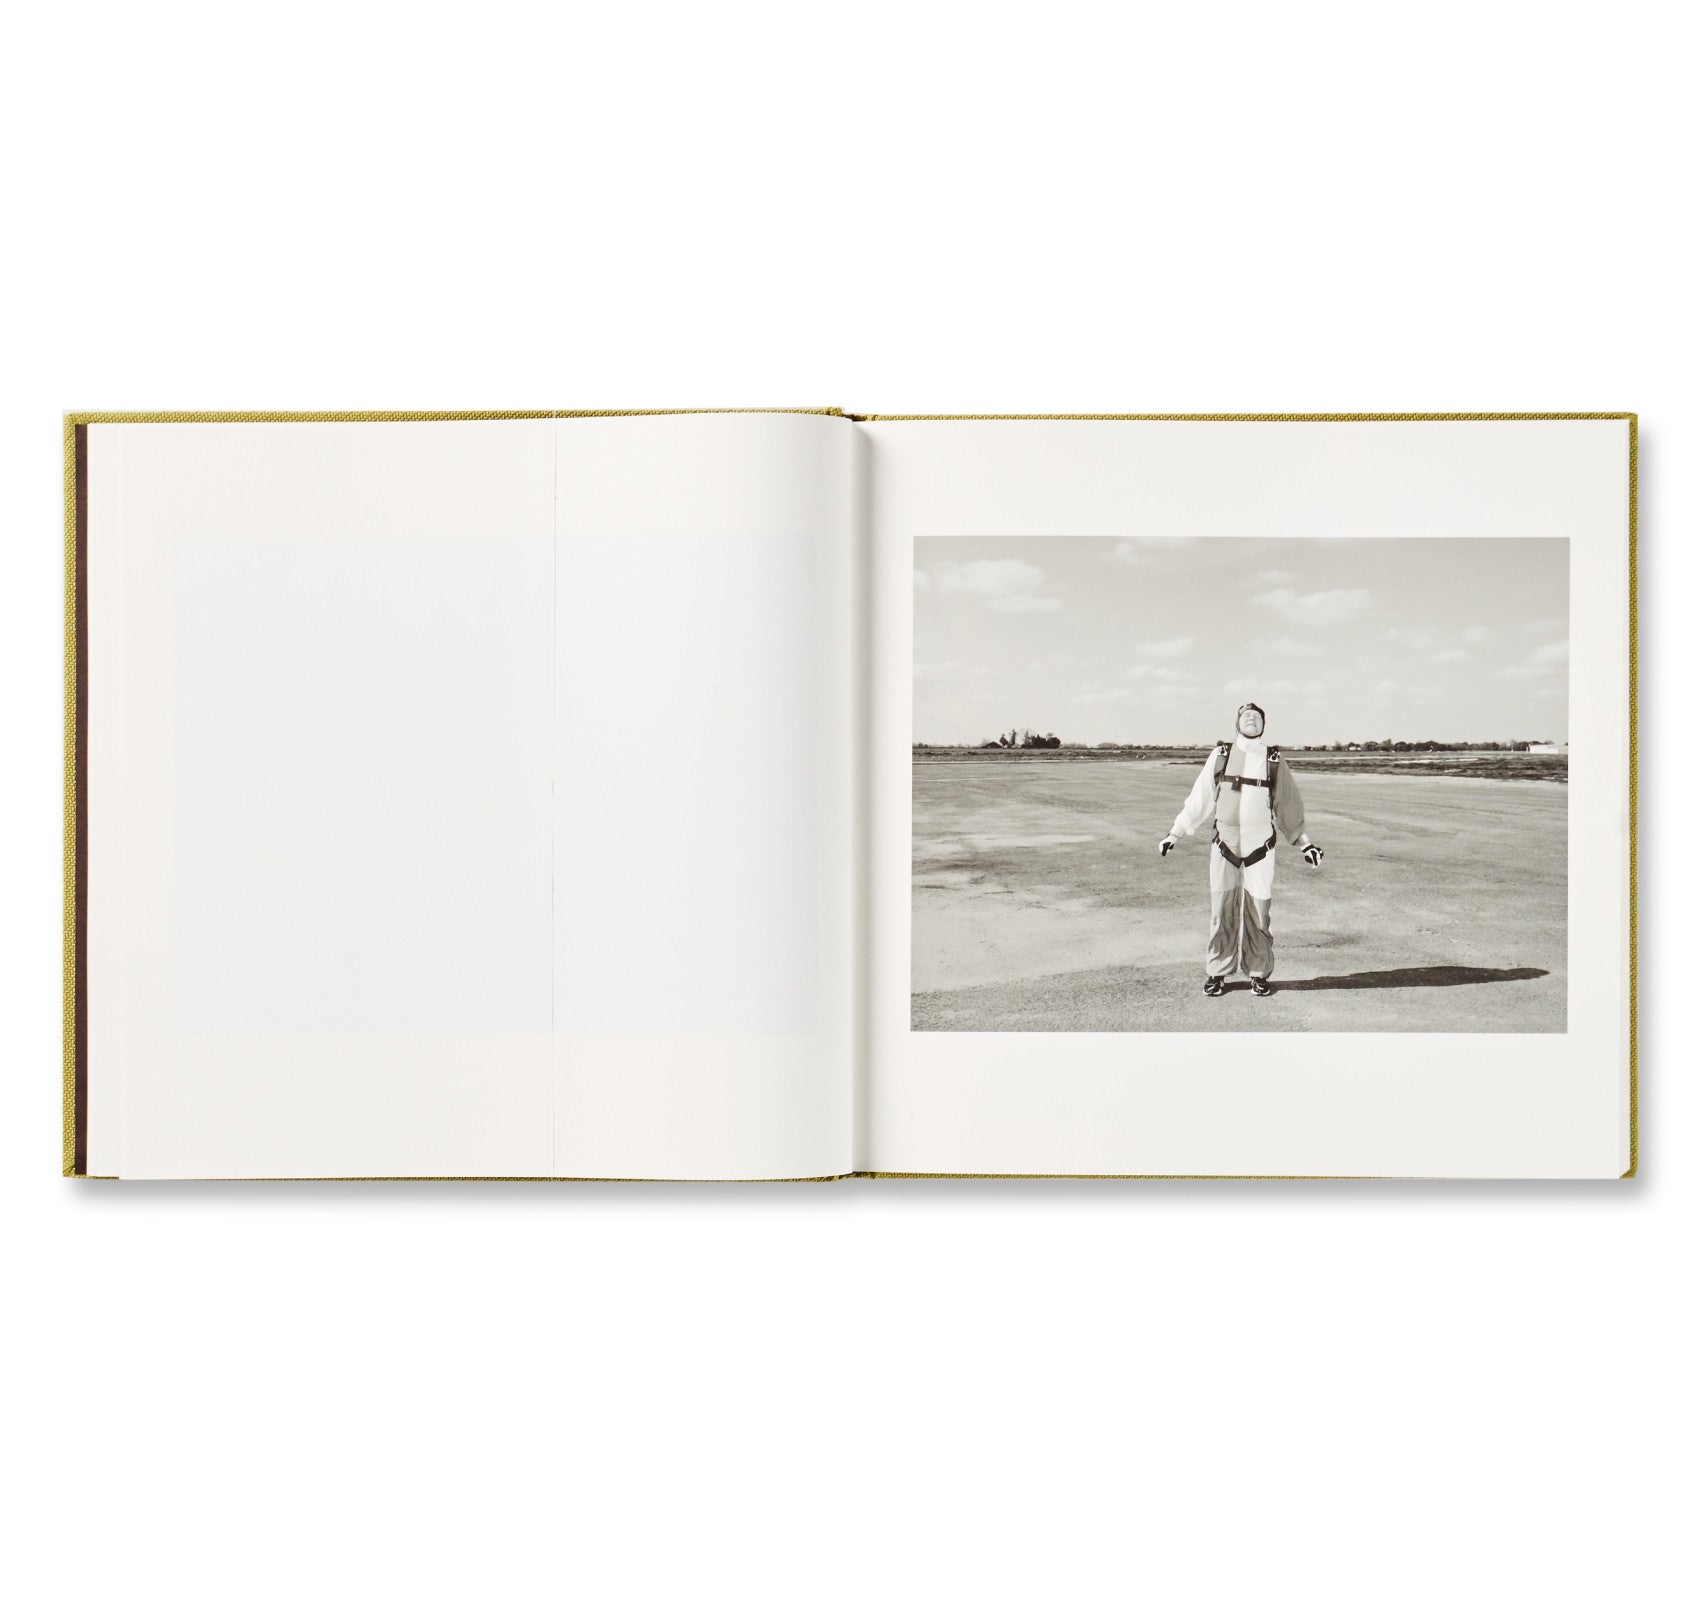 SONGBOOK by Alec Soth [FIRST EDITION, SECOND PRINTING / SIGNED]